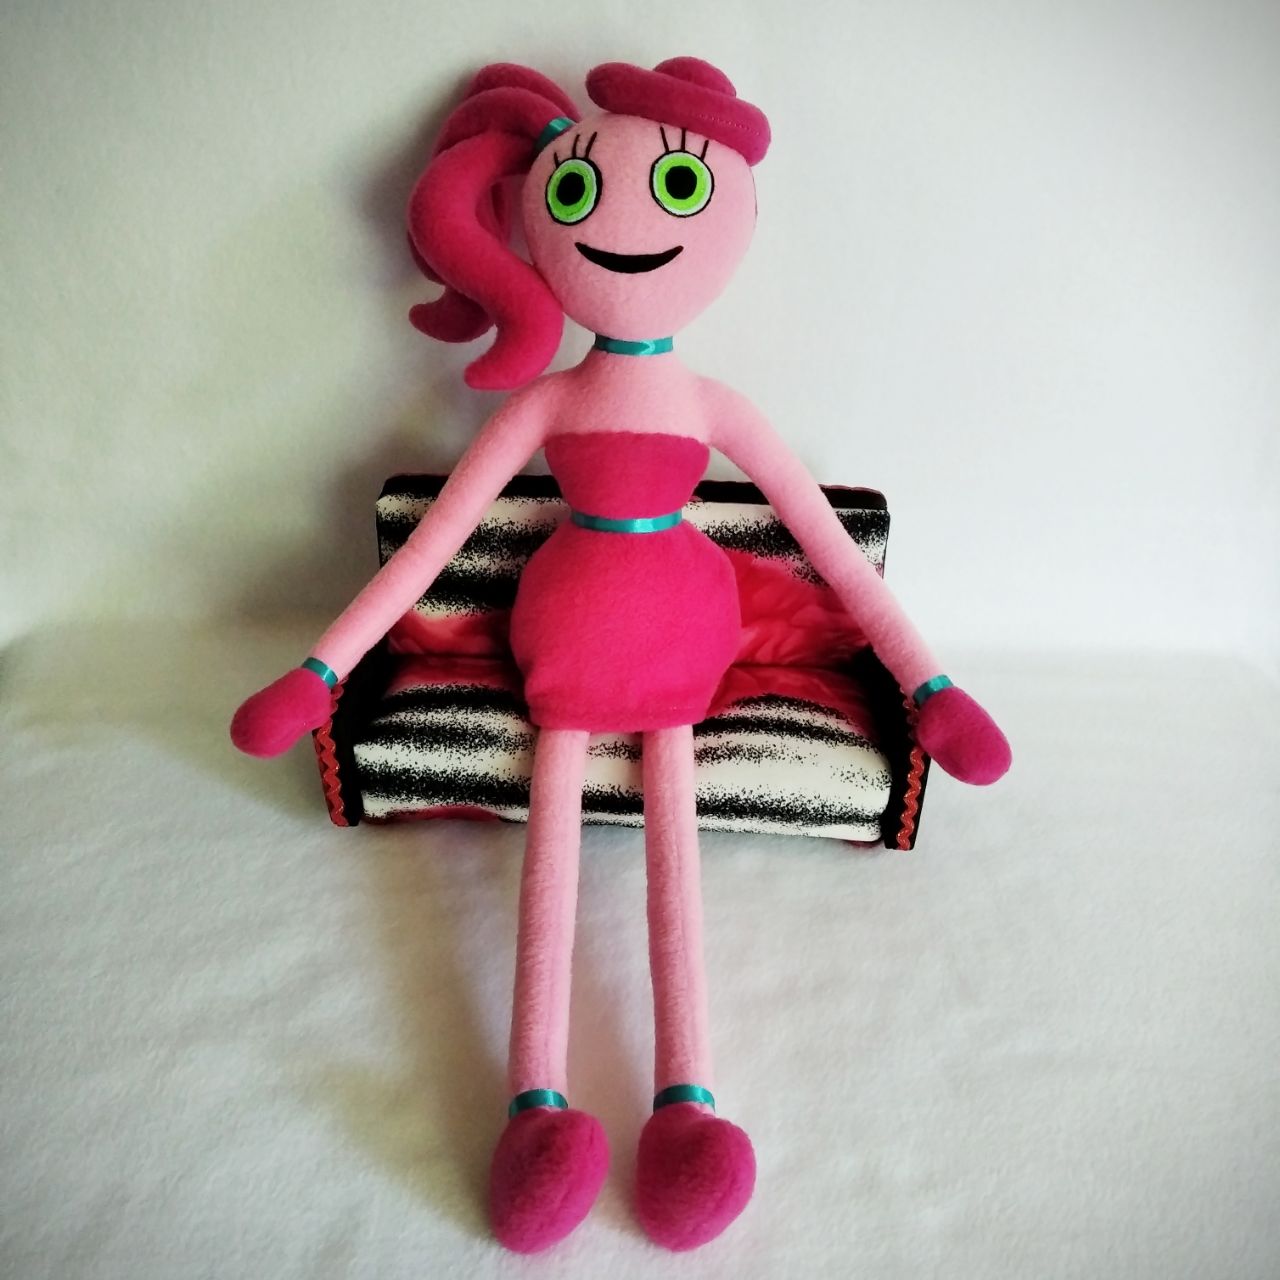 mommys long legs toy doll irl｜TikTok Search